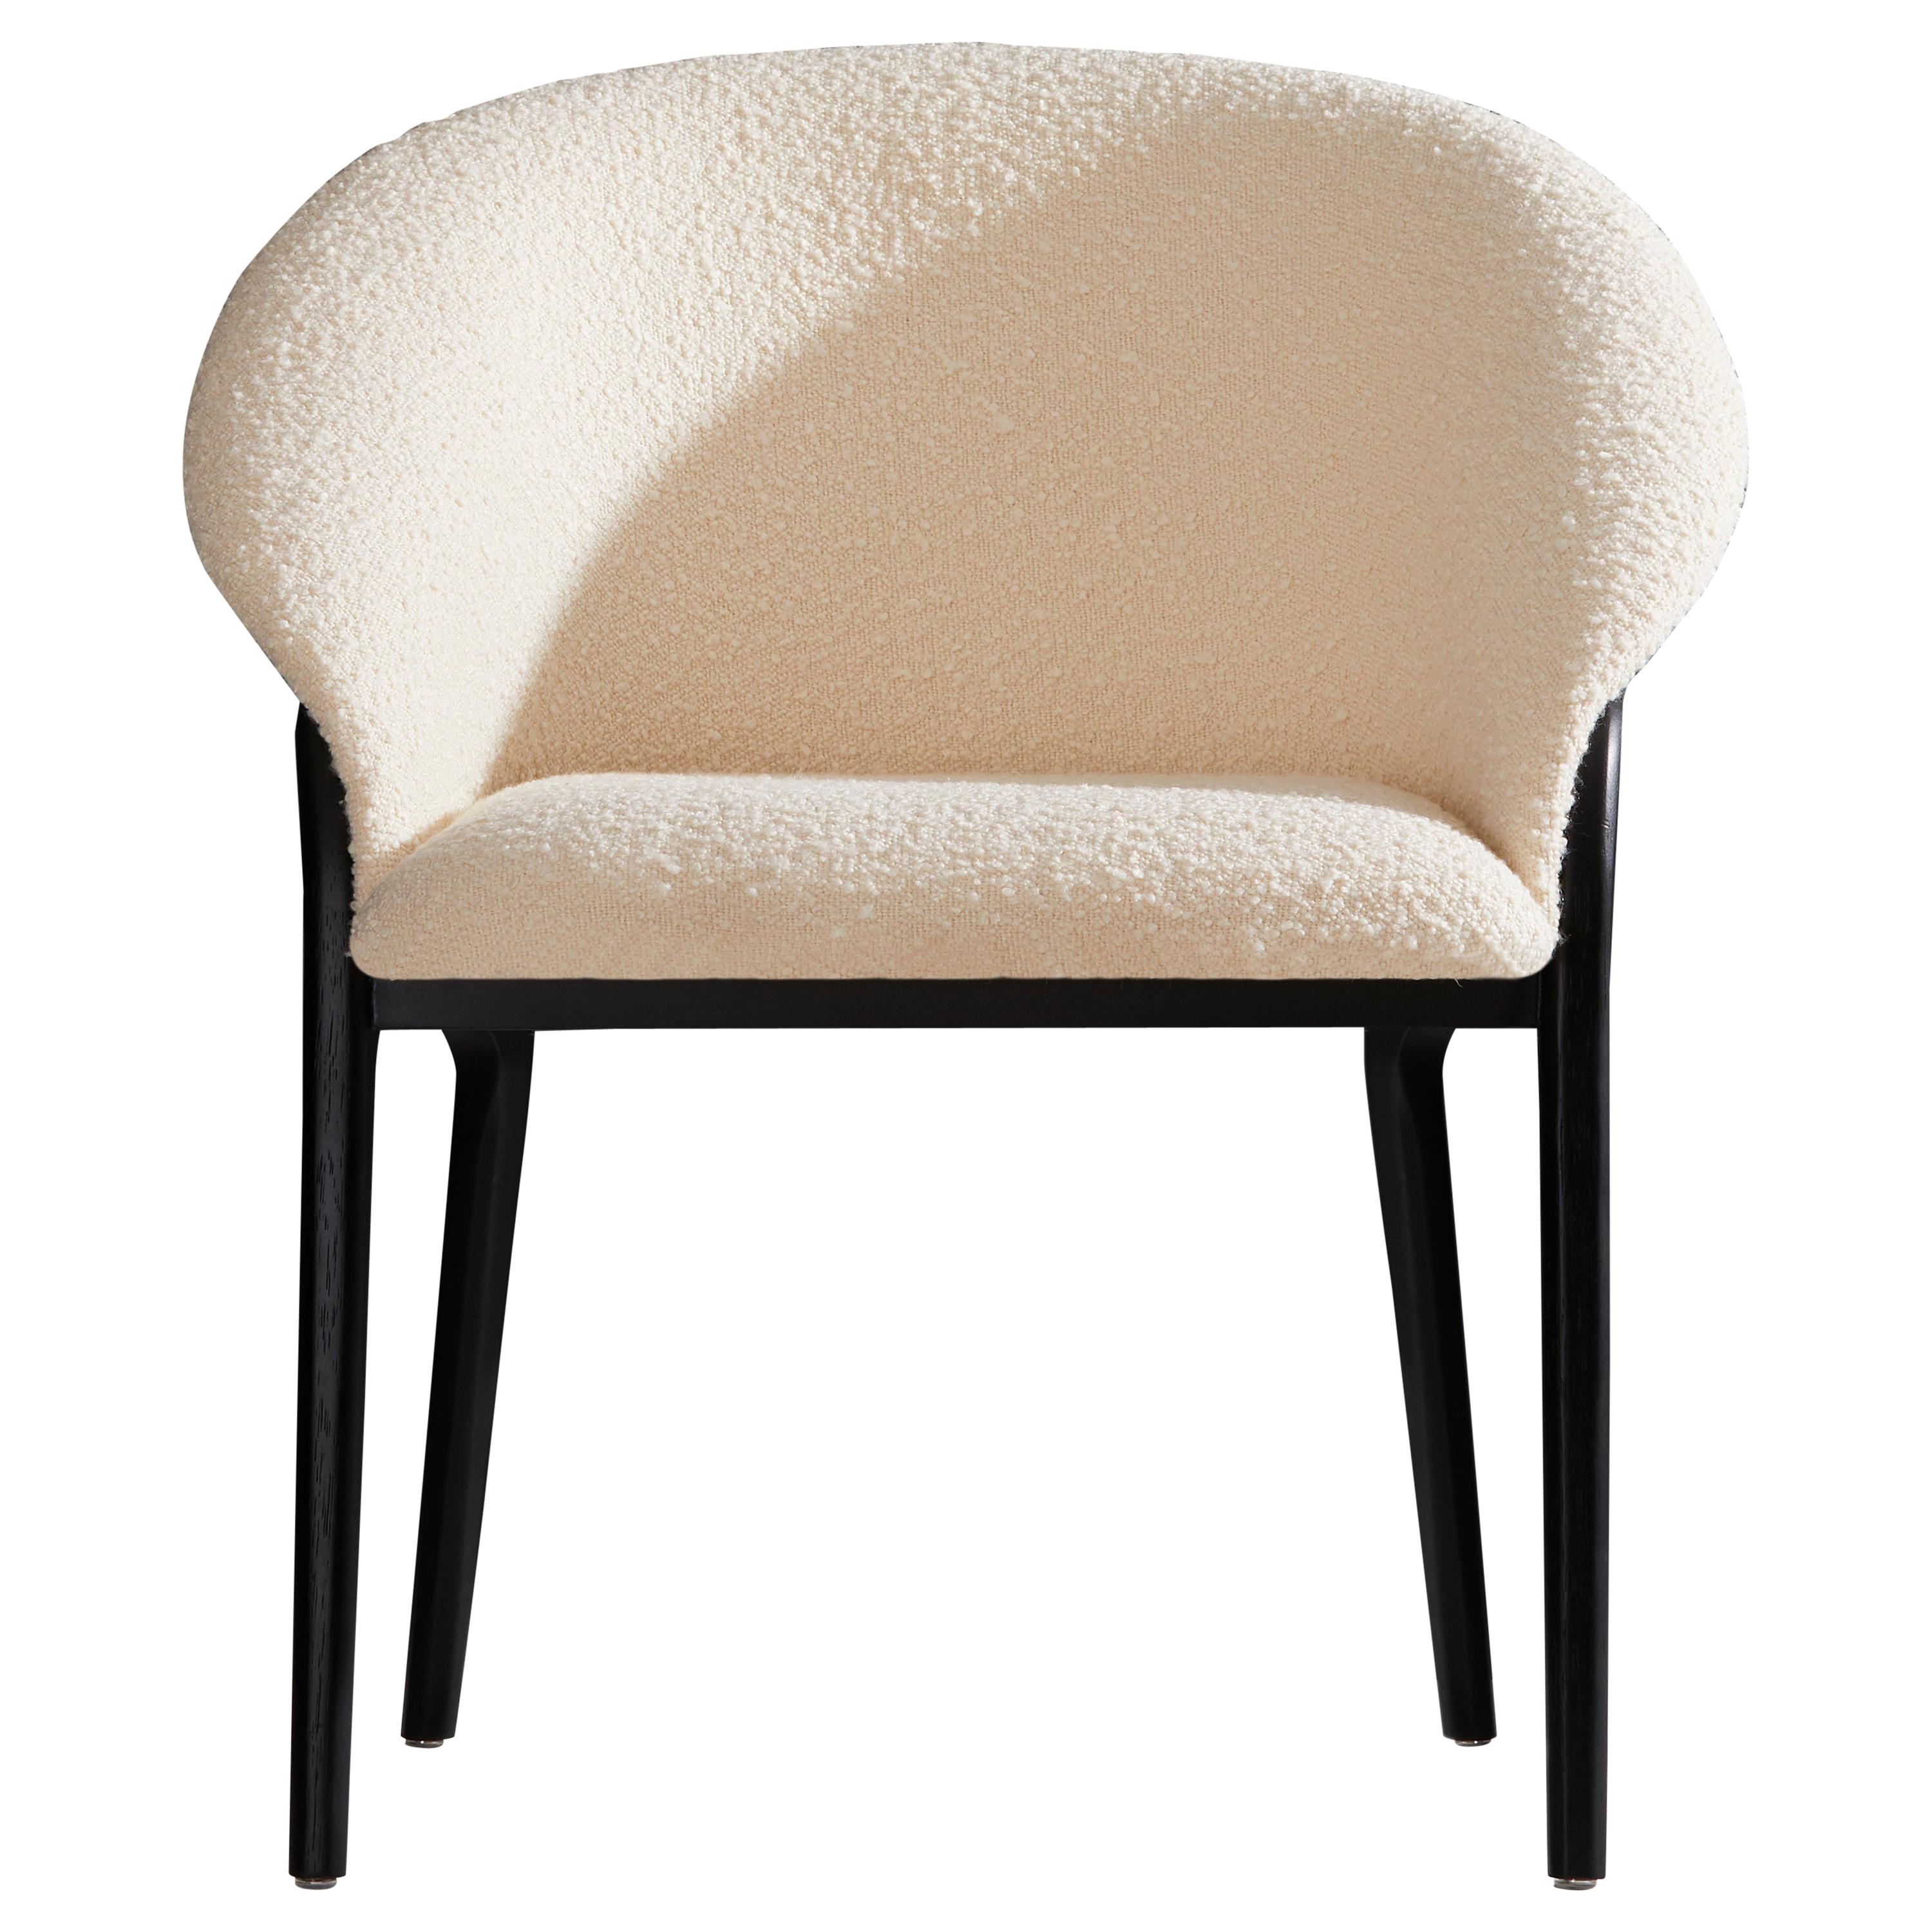 Minimalist Organic Chair in Solid Wood, Upholstered Seating For Sale